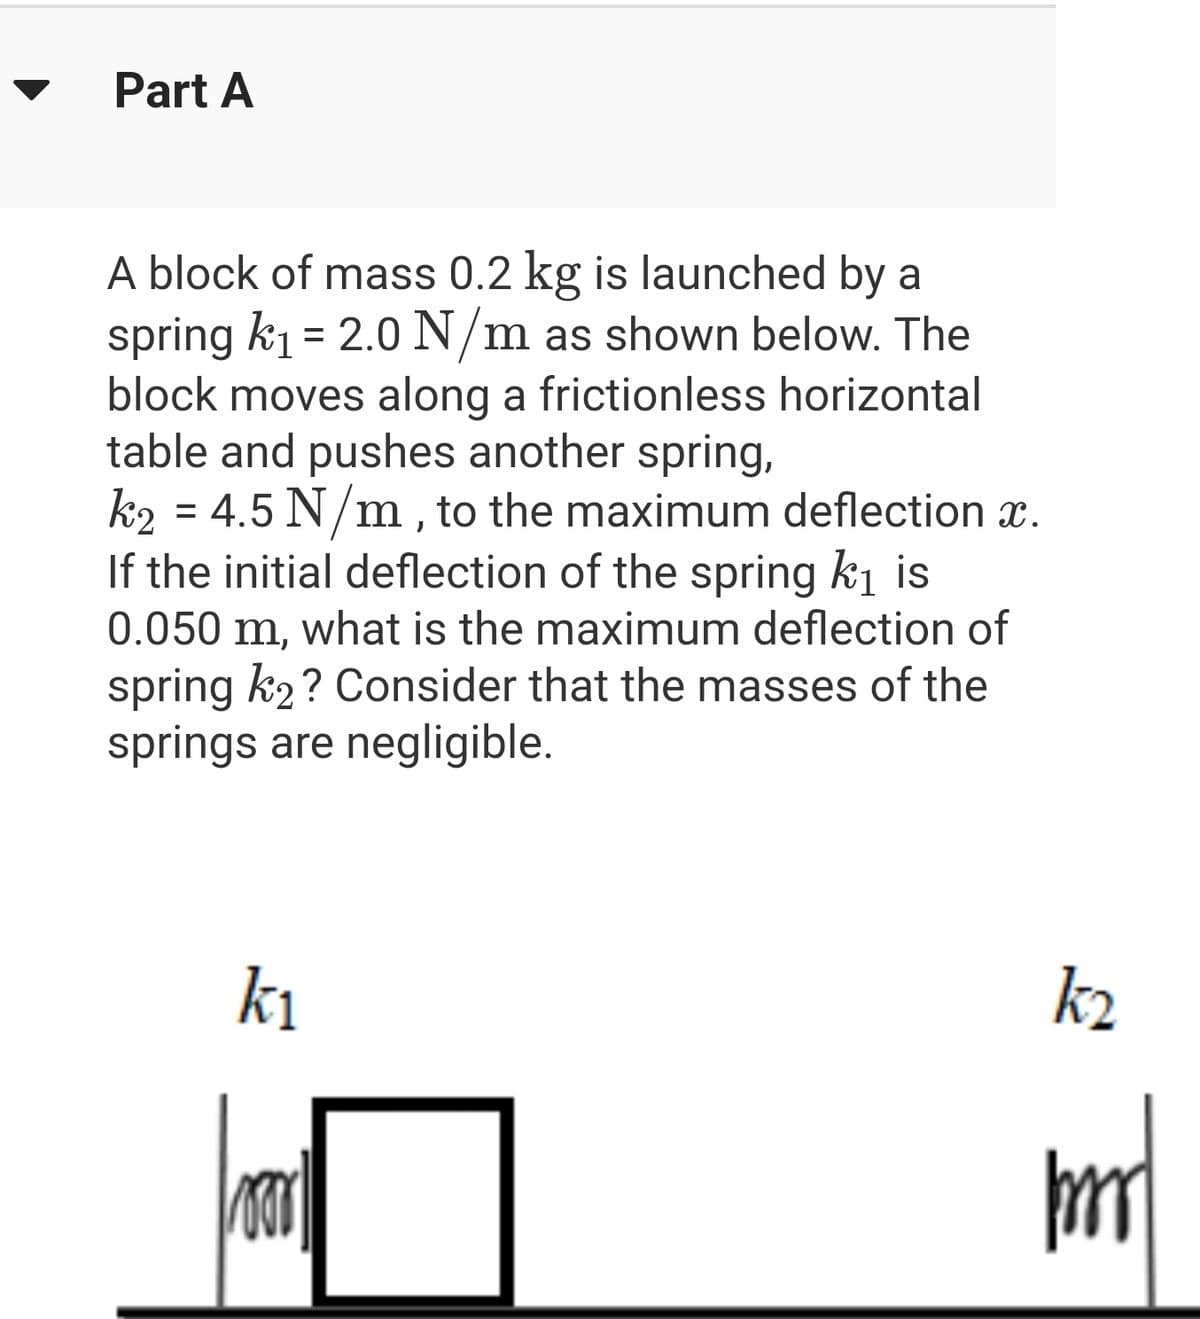 Part A
A block of mass 0.2 kg is launched by a
spring k₁= 2.0 N/m as shown below. The
block moves along a frictionless horizontal
table and pushes another spring,
k₂ = 4.5 N/m, to the maximum deflection x.
If the initial deflection of the spring k₁ is
0.050 m, what is the maximum deflection of
spring k₂? Consider that the masses of the
springs are negligible.
k₁
Foor
k₂
mmm